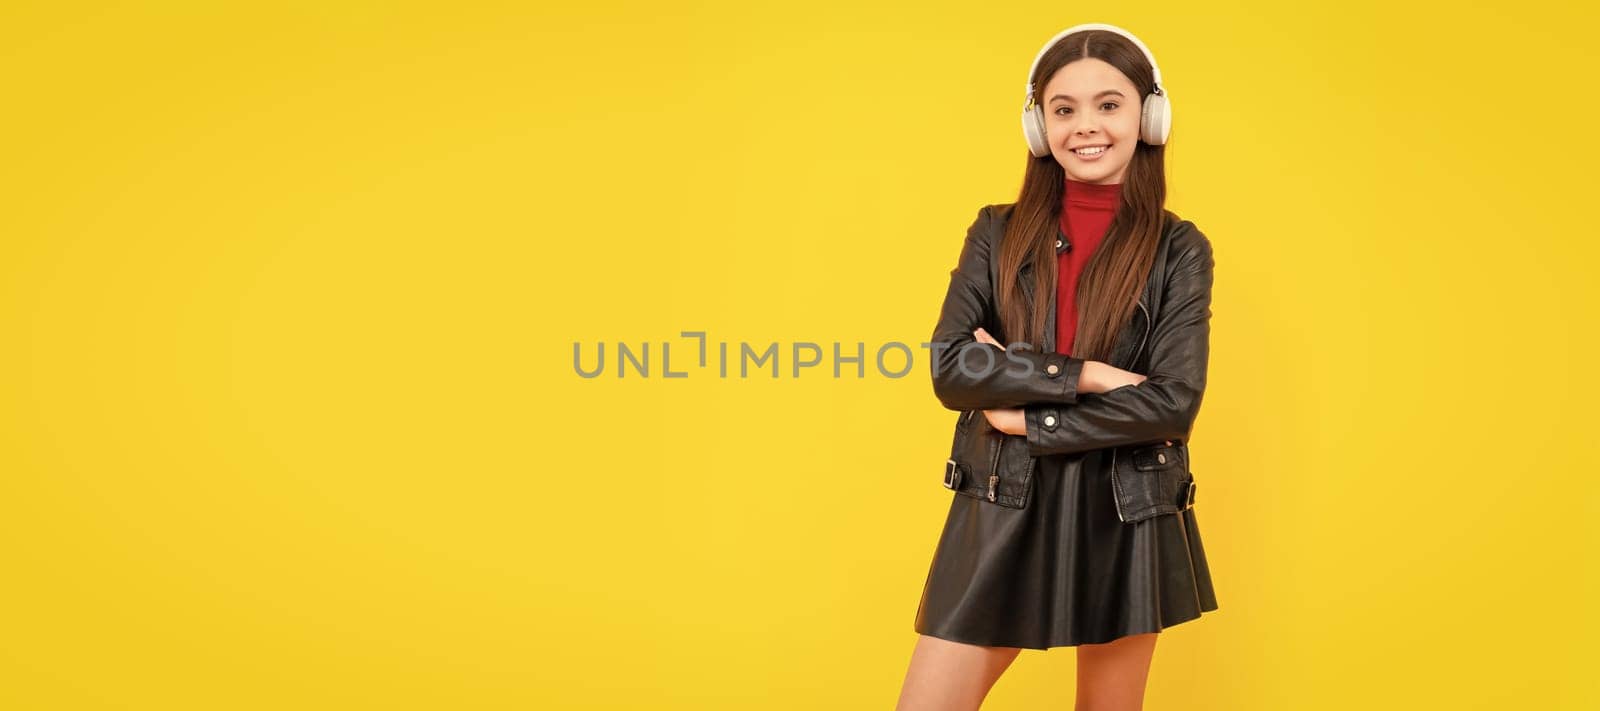 back to school. cheerful teen girl in headphones full length. music lover. Child portrait with headphones, horizontal poster. Girl listening to music, banner with copy space. by RedFoxStudio